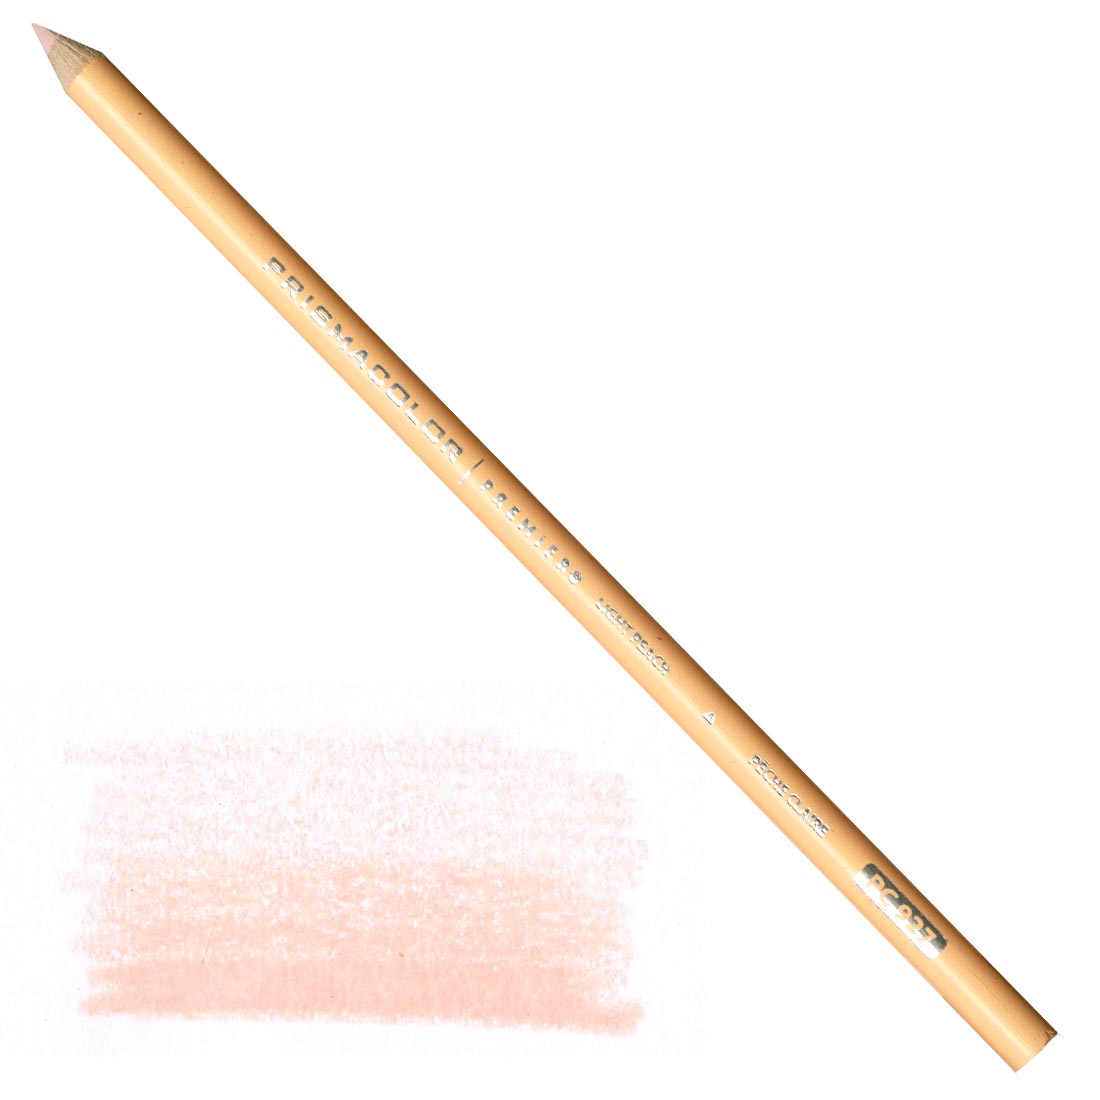 Light Peach Prismacolor Premier Colored Pencil with a sample colored swatch